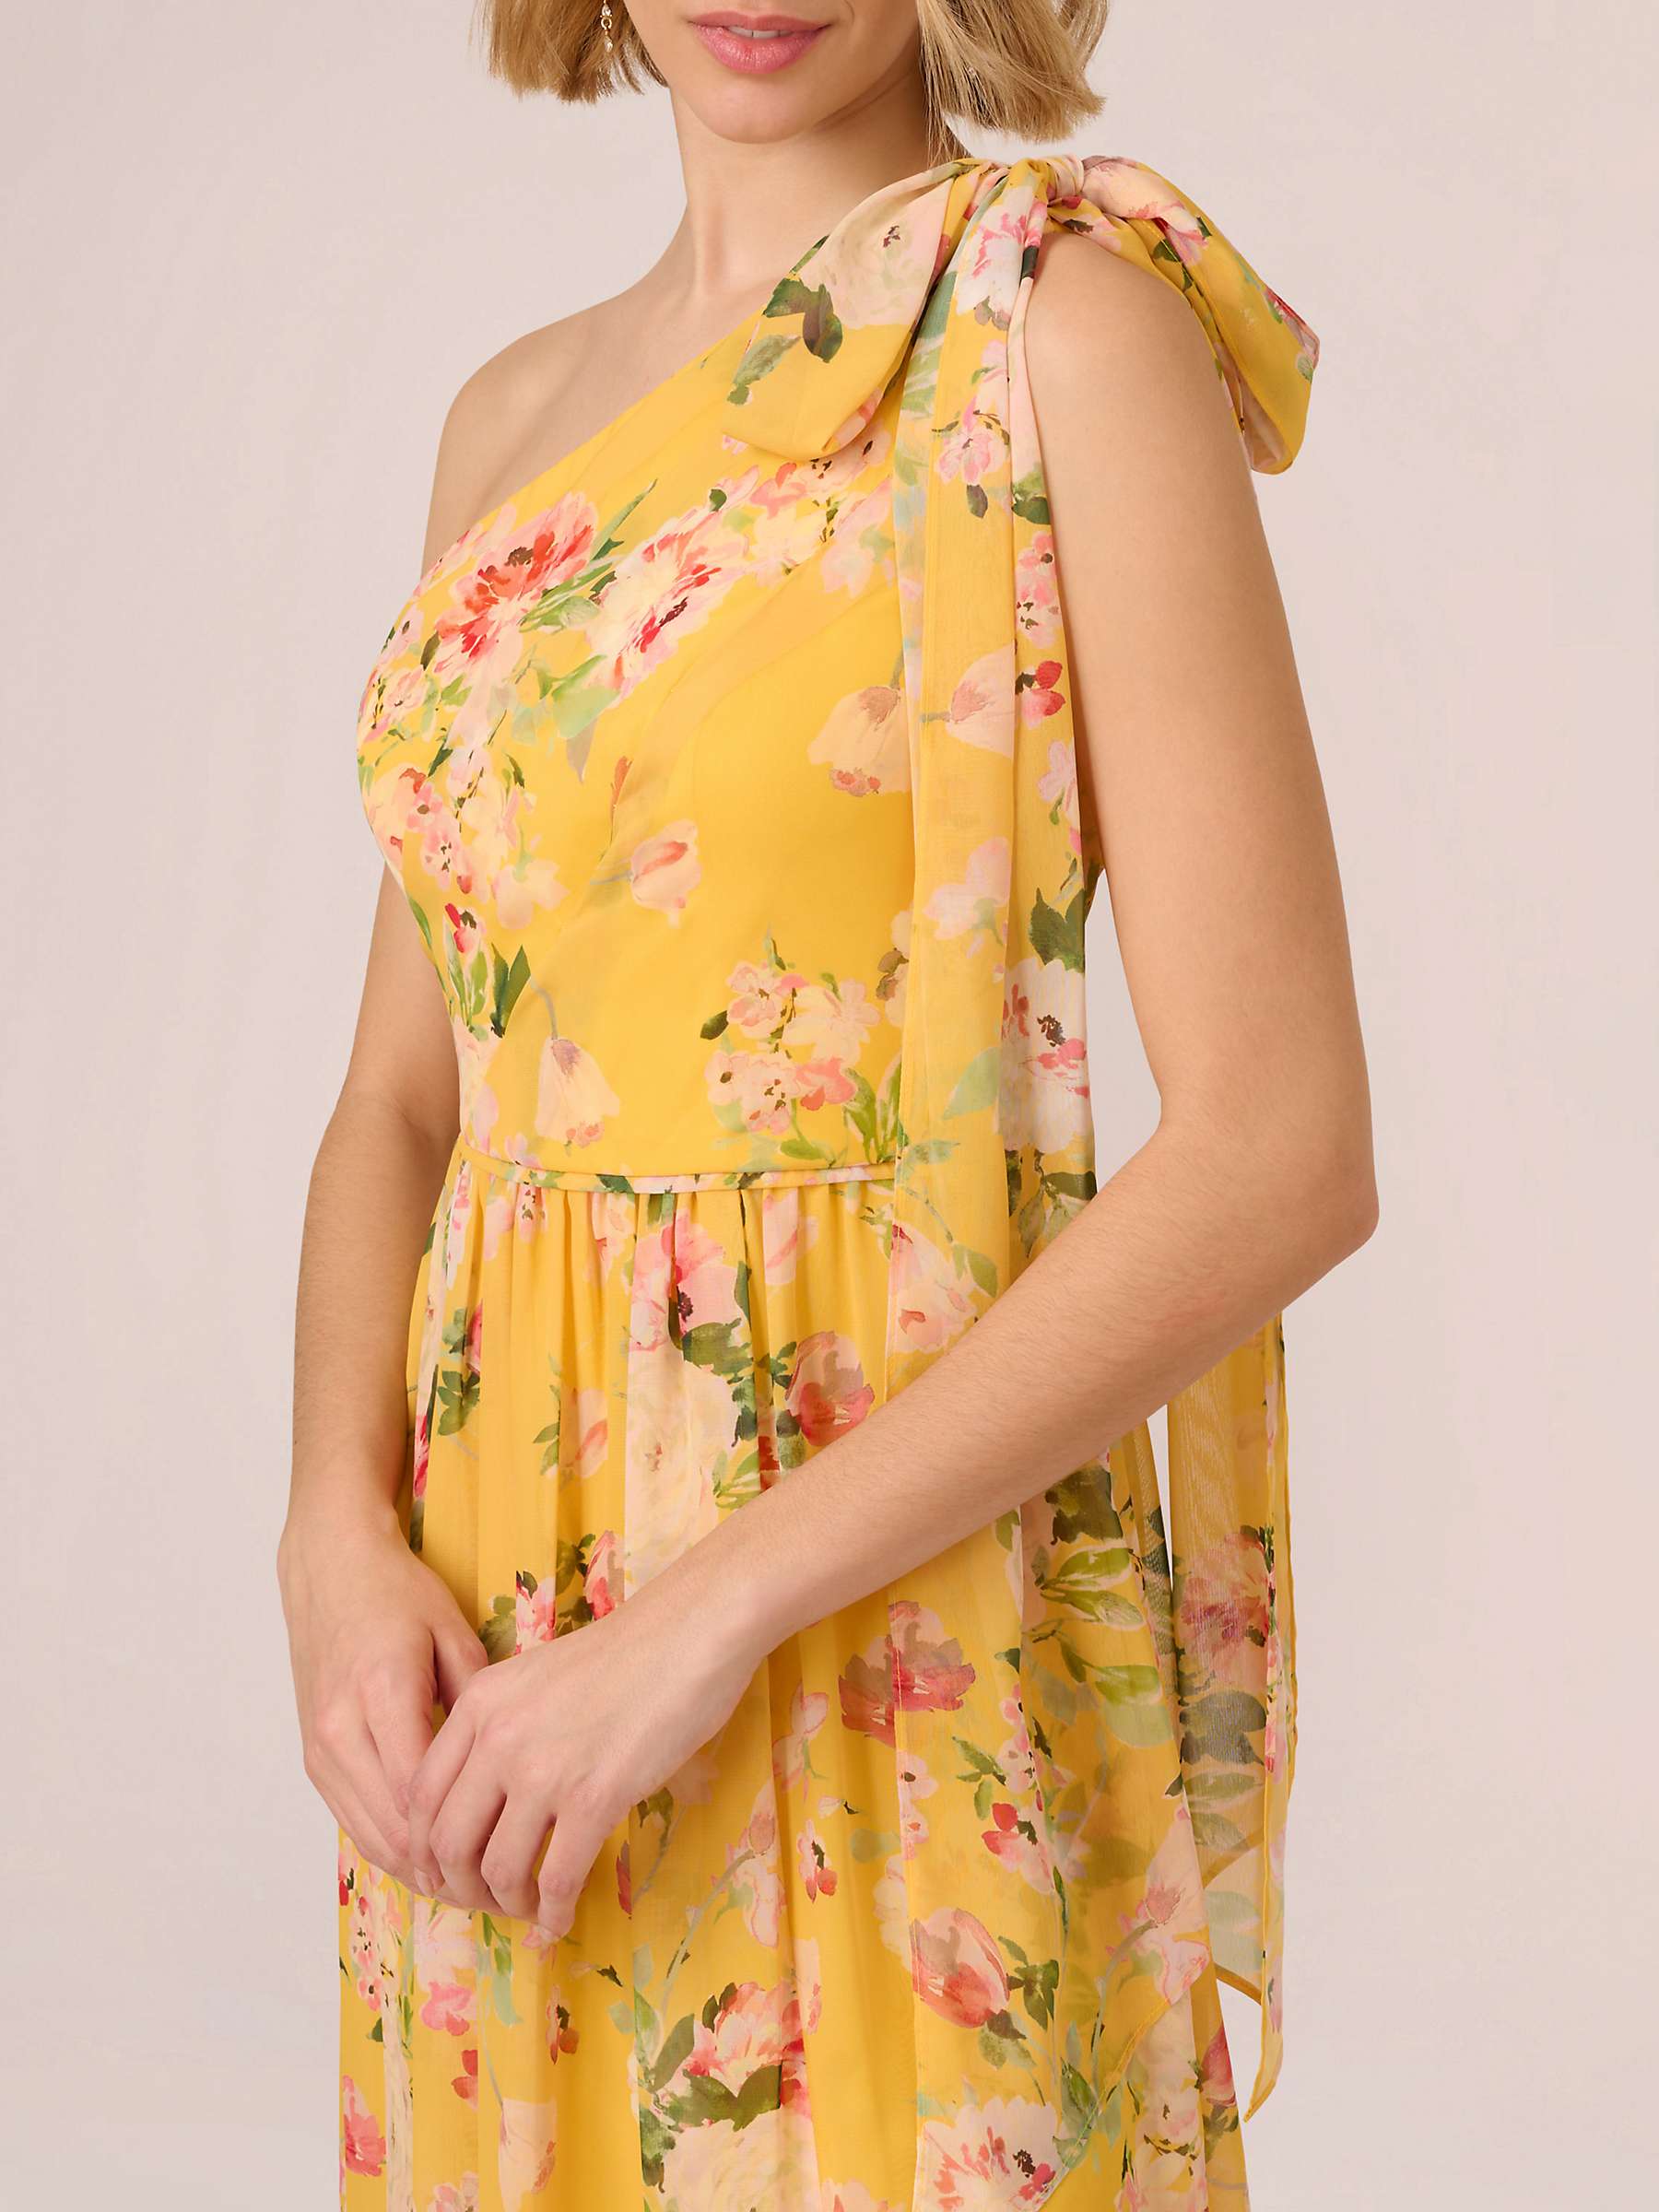 Buy Adrianna Papell One Shoulder Floral Chiffon Maxi Dress, Yellow/Multi Online at johnlewis.com